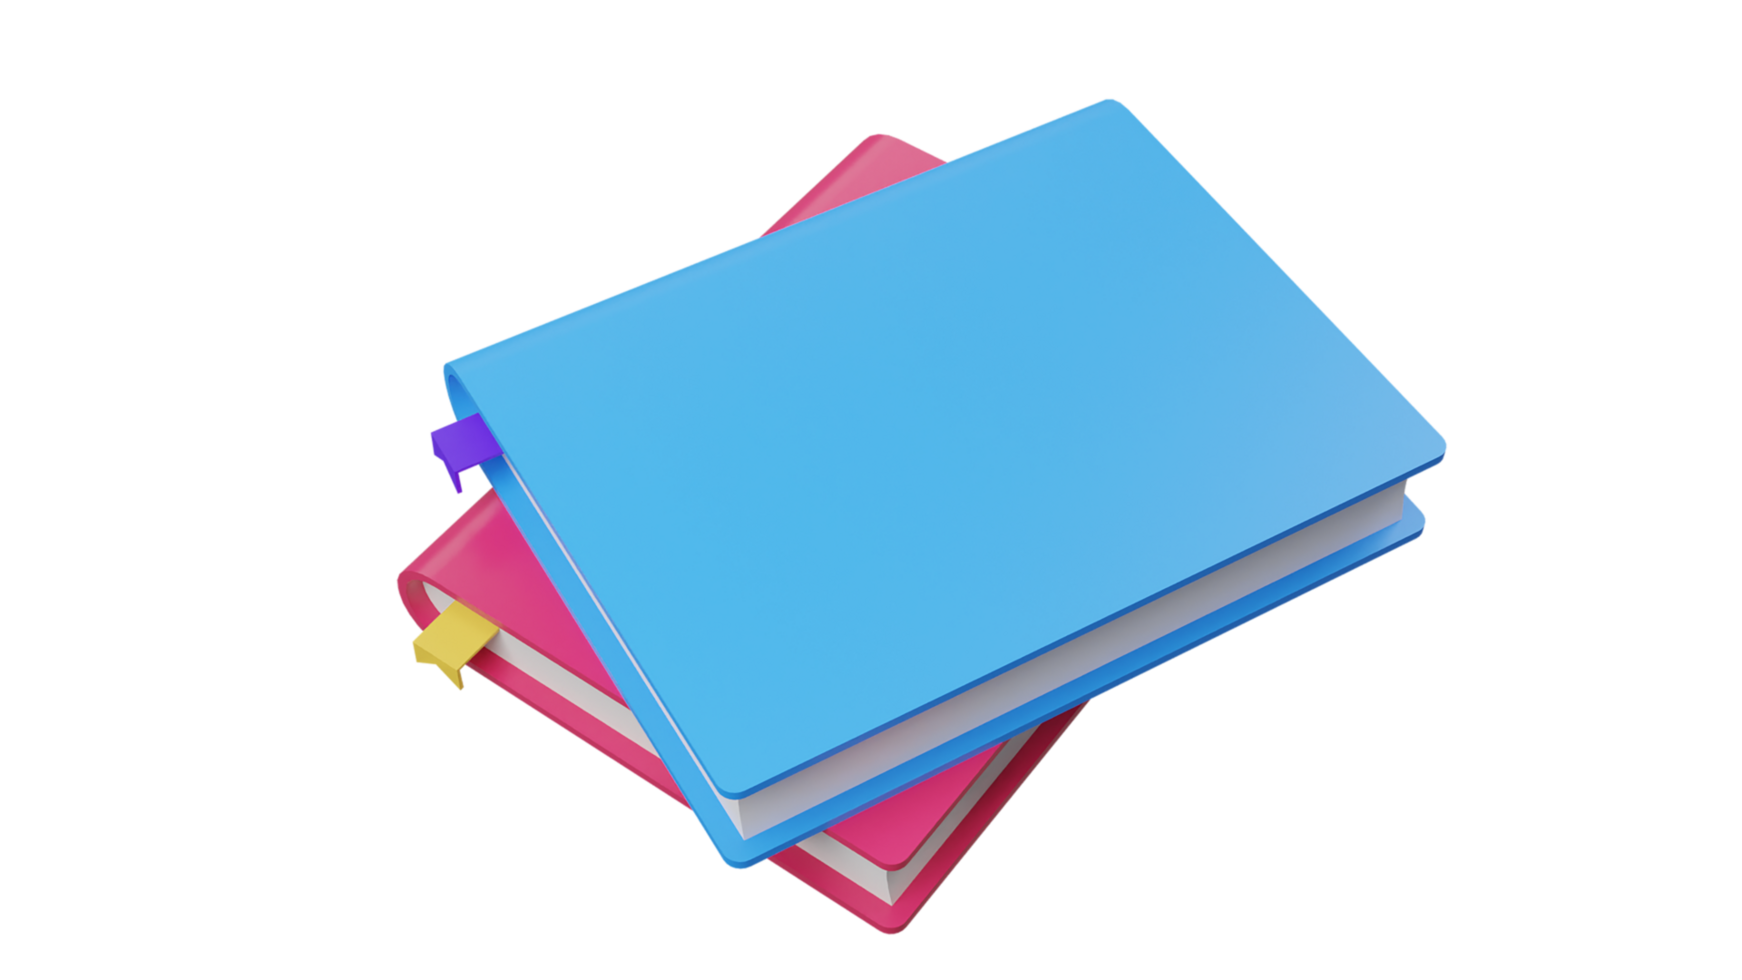 3d Books icon for web design isolated, Education and online class concept. 3d illustration png